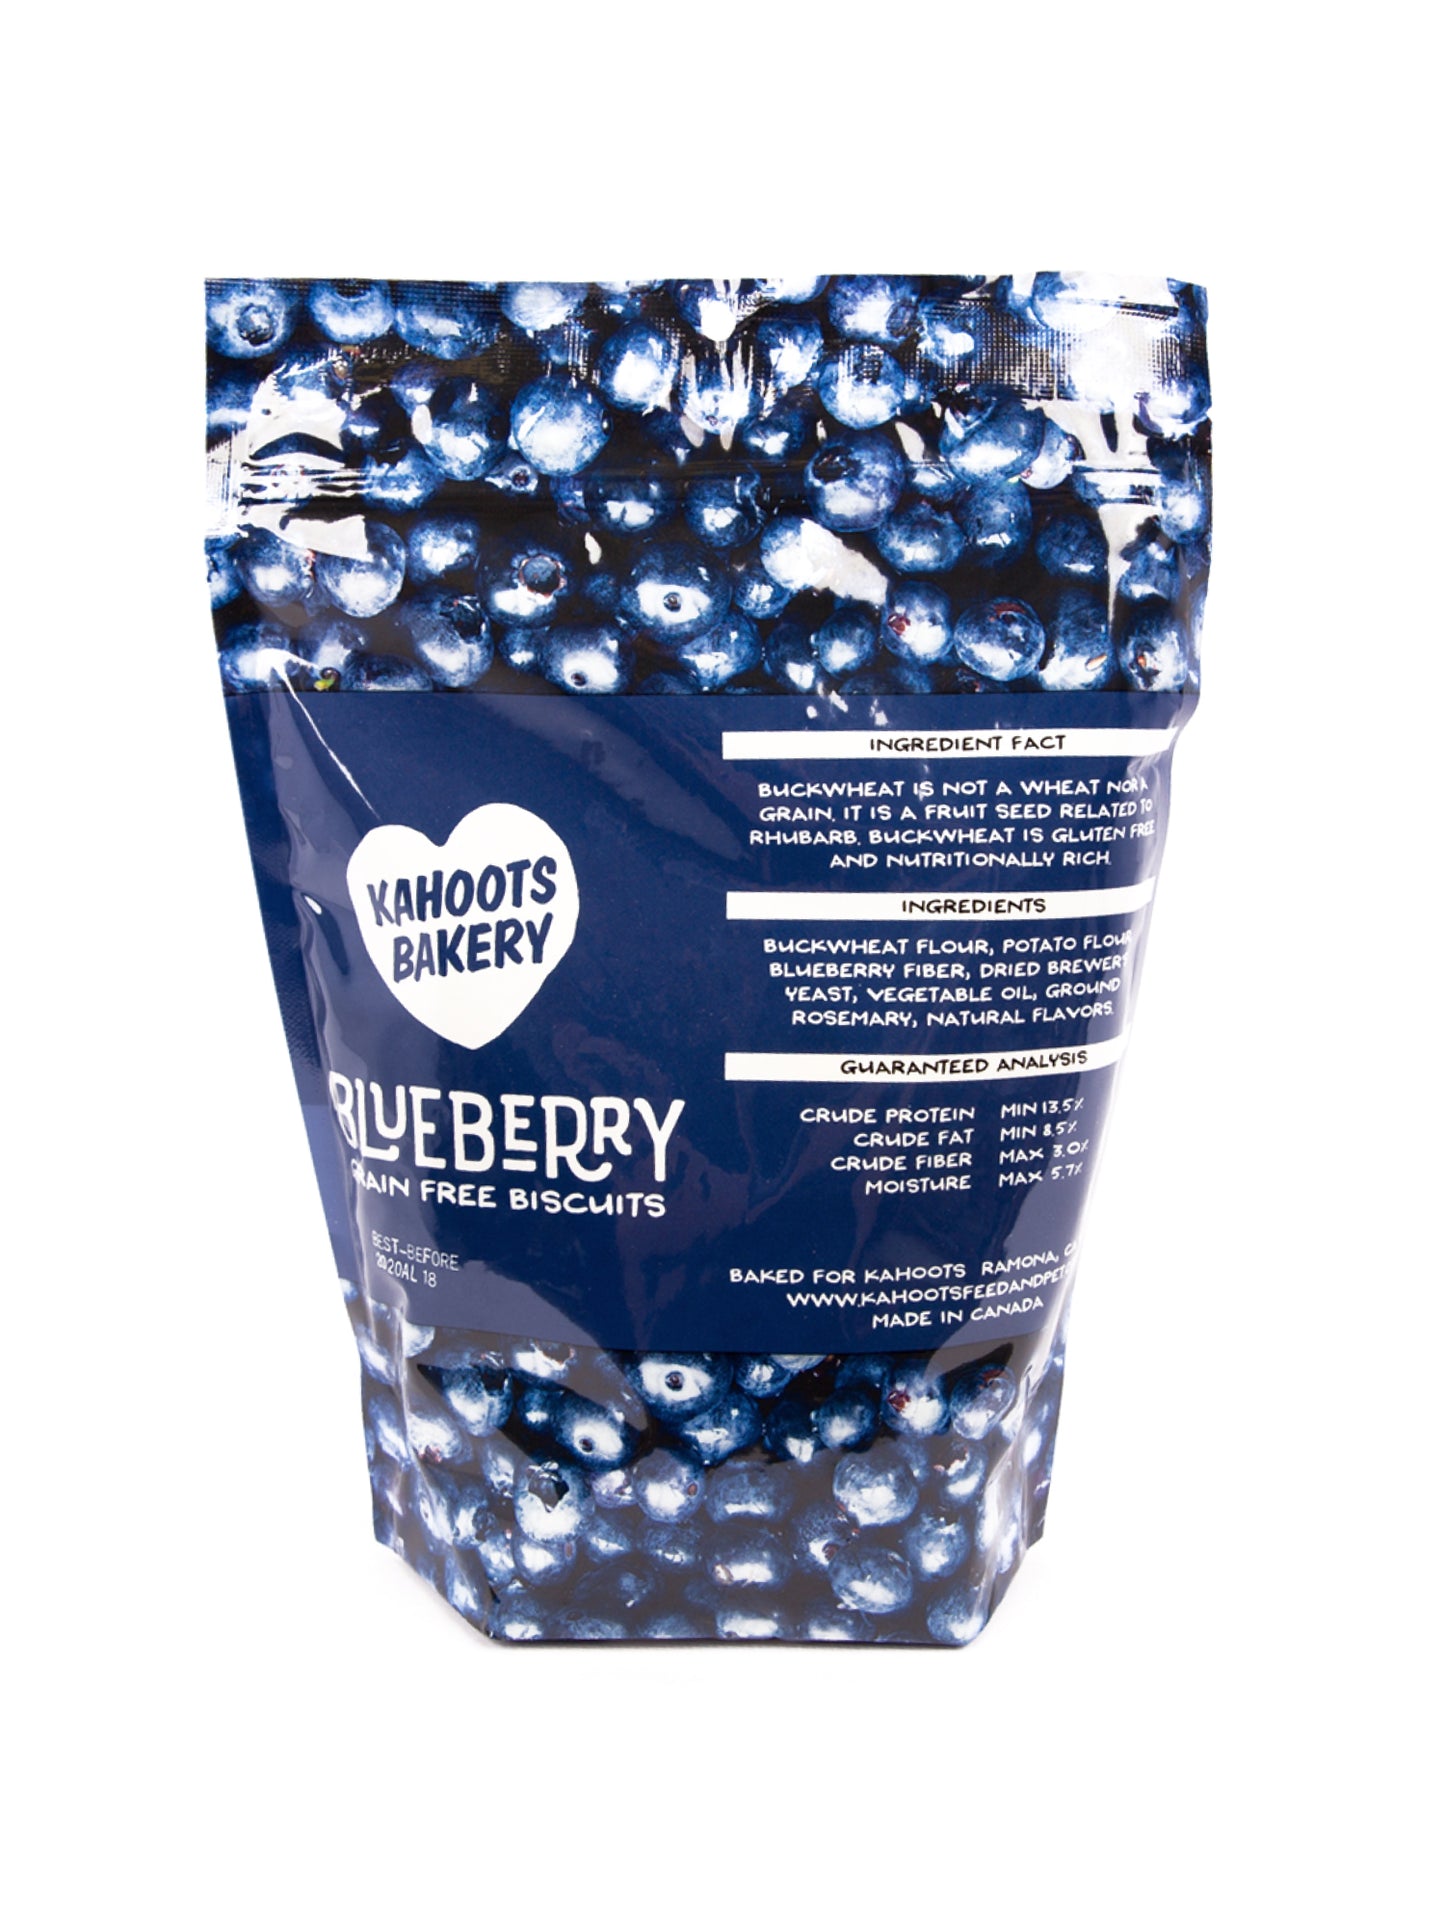 Back label of blueberry dog biscuits